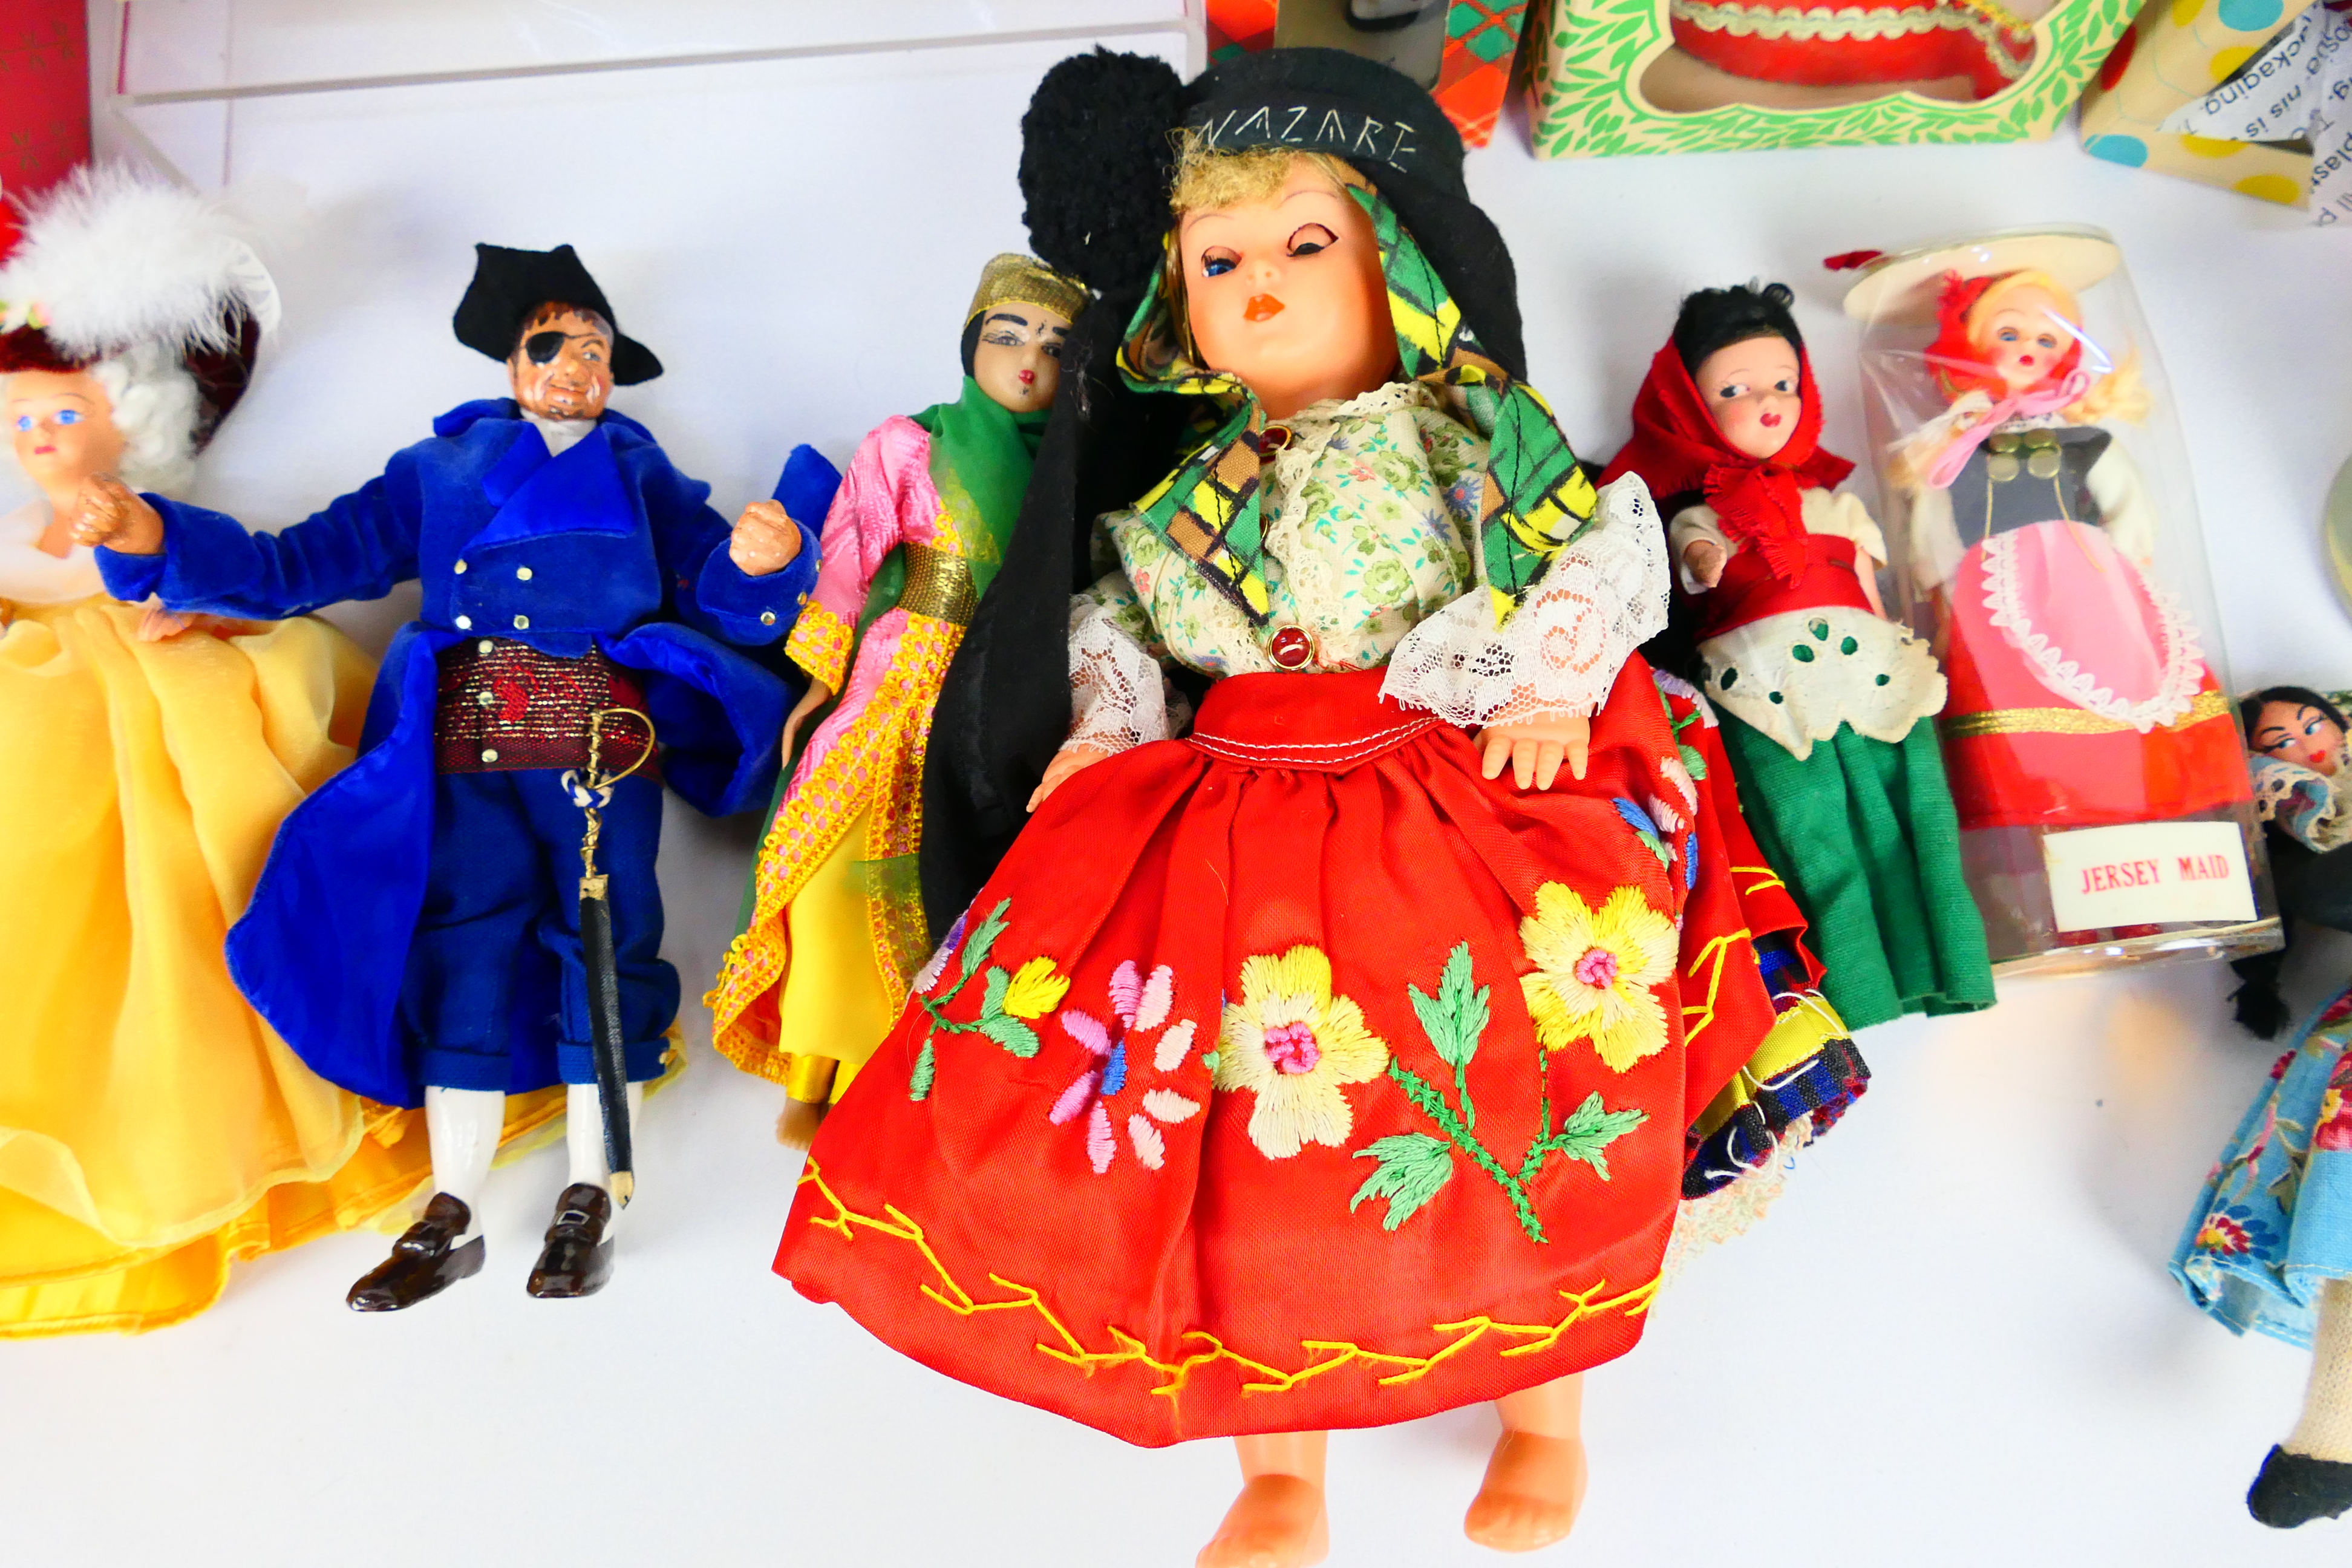 Peggy Nisbet - Myfanwy - Muster - A collection of over 15 mixed plastic dolls. - Image 3 of 6